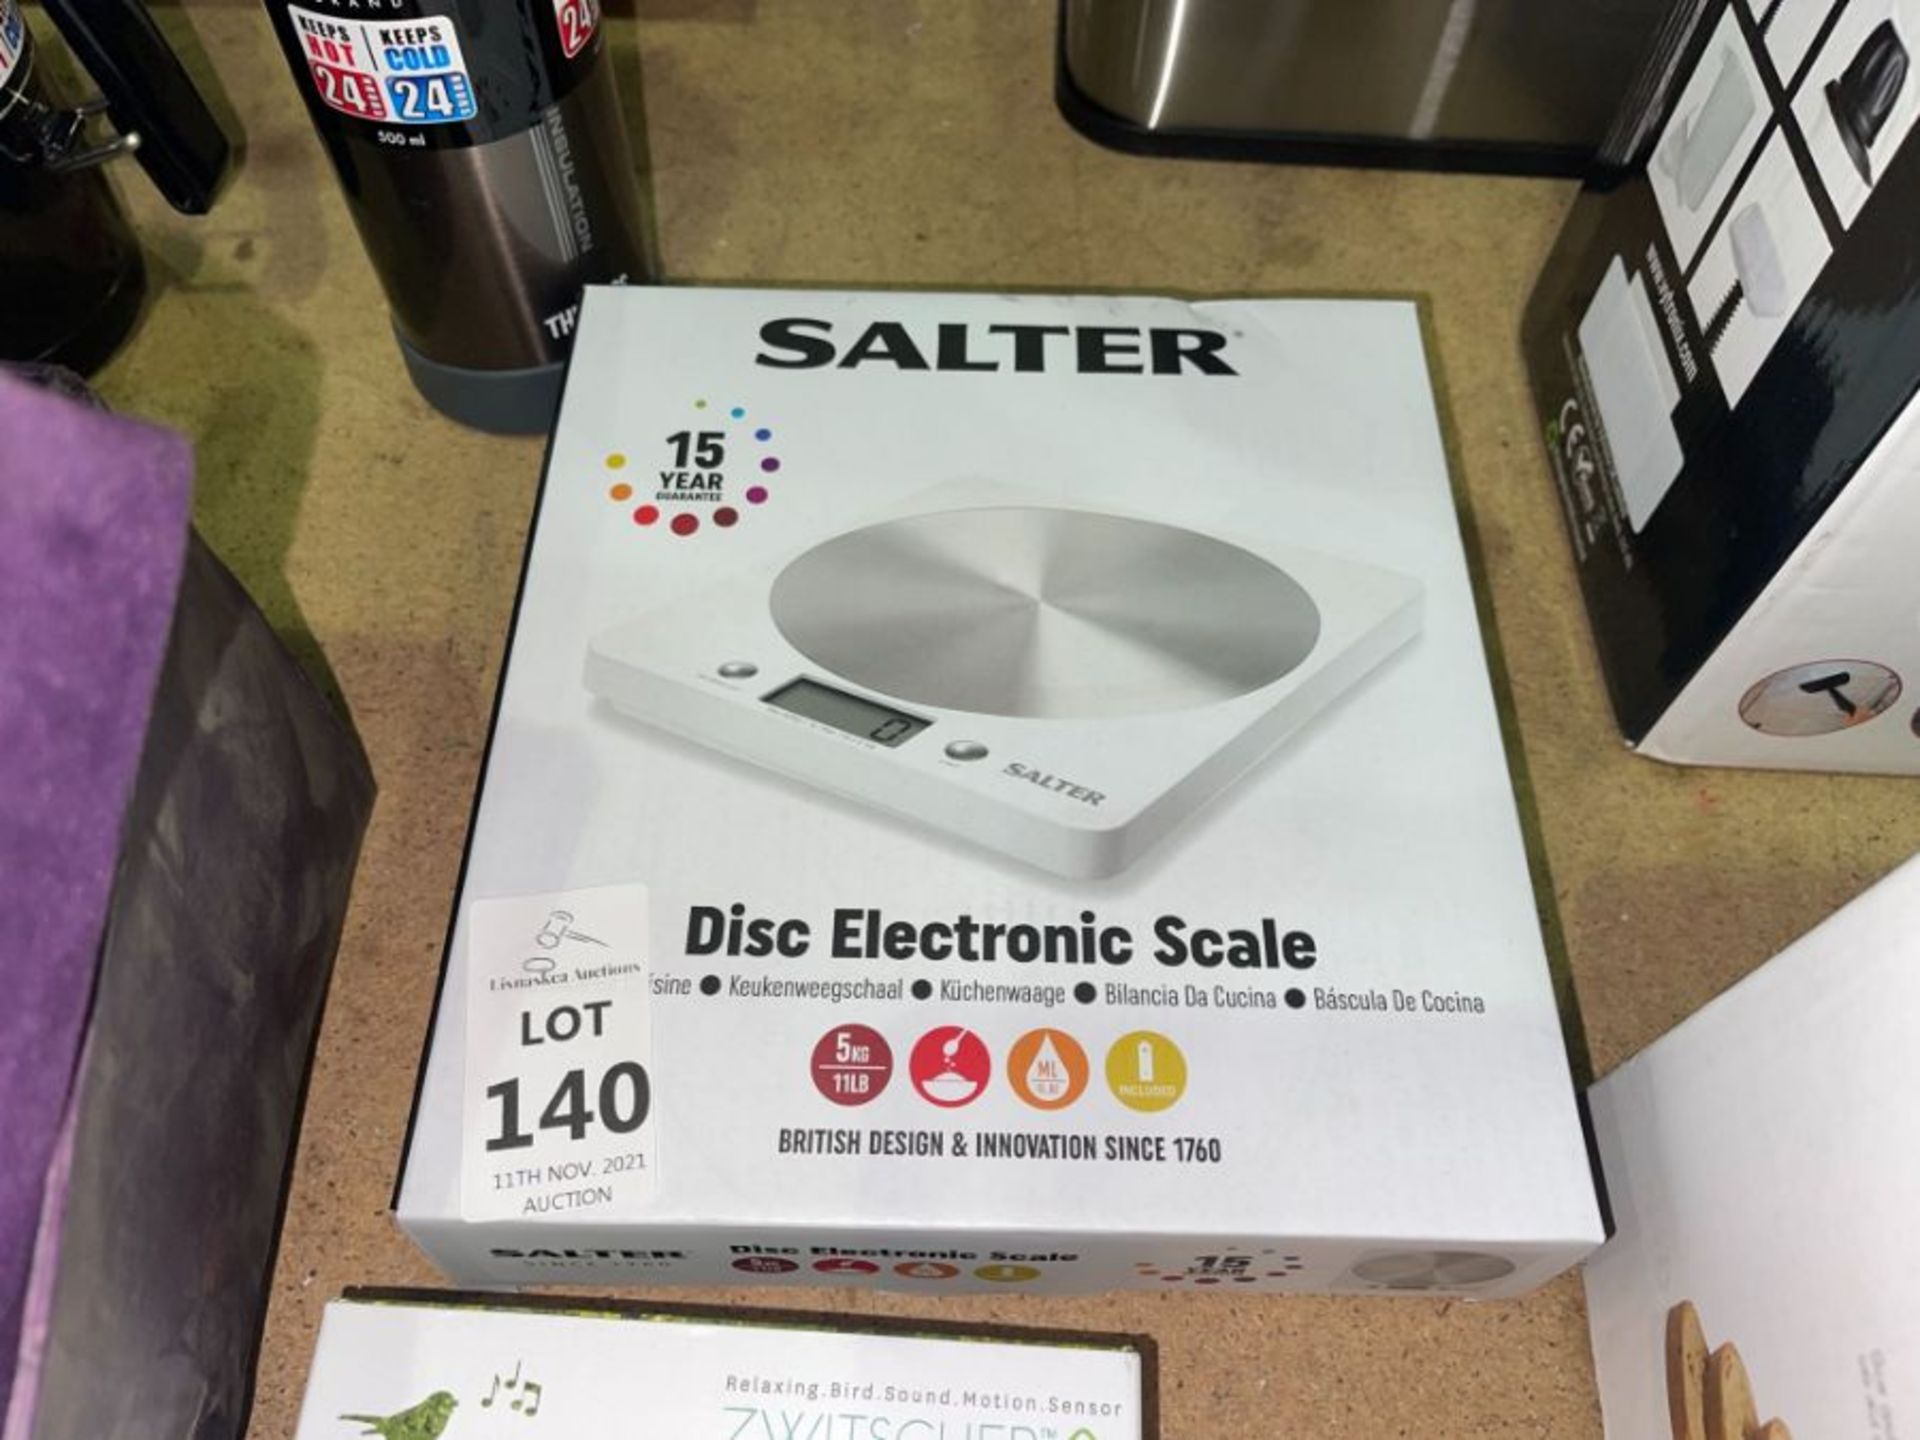 SALTER DISC ELECTRONIC SCALE